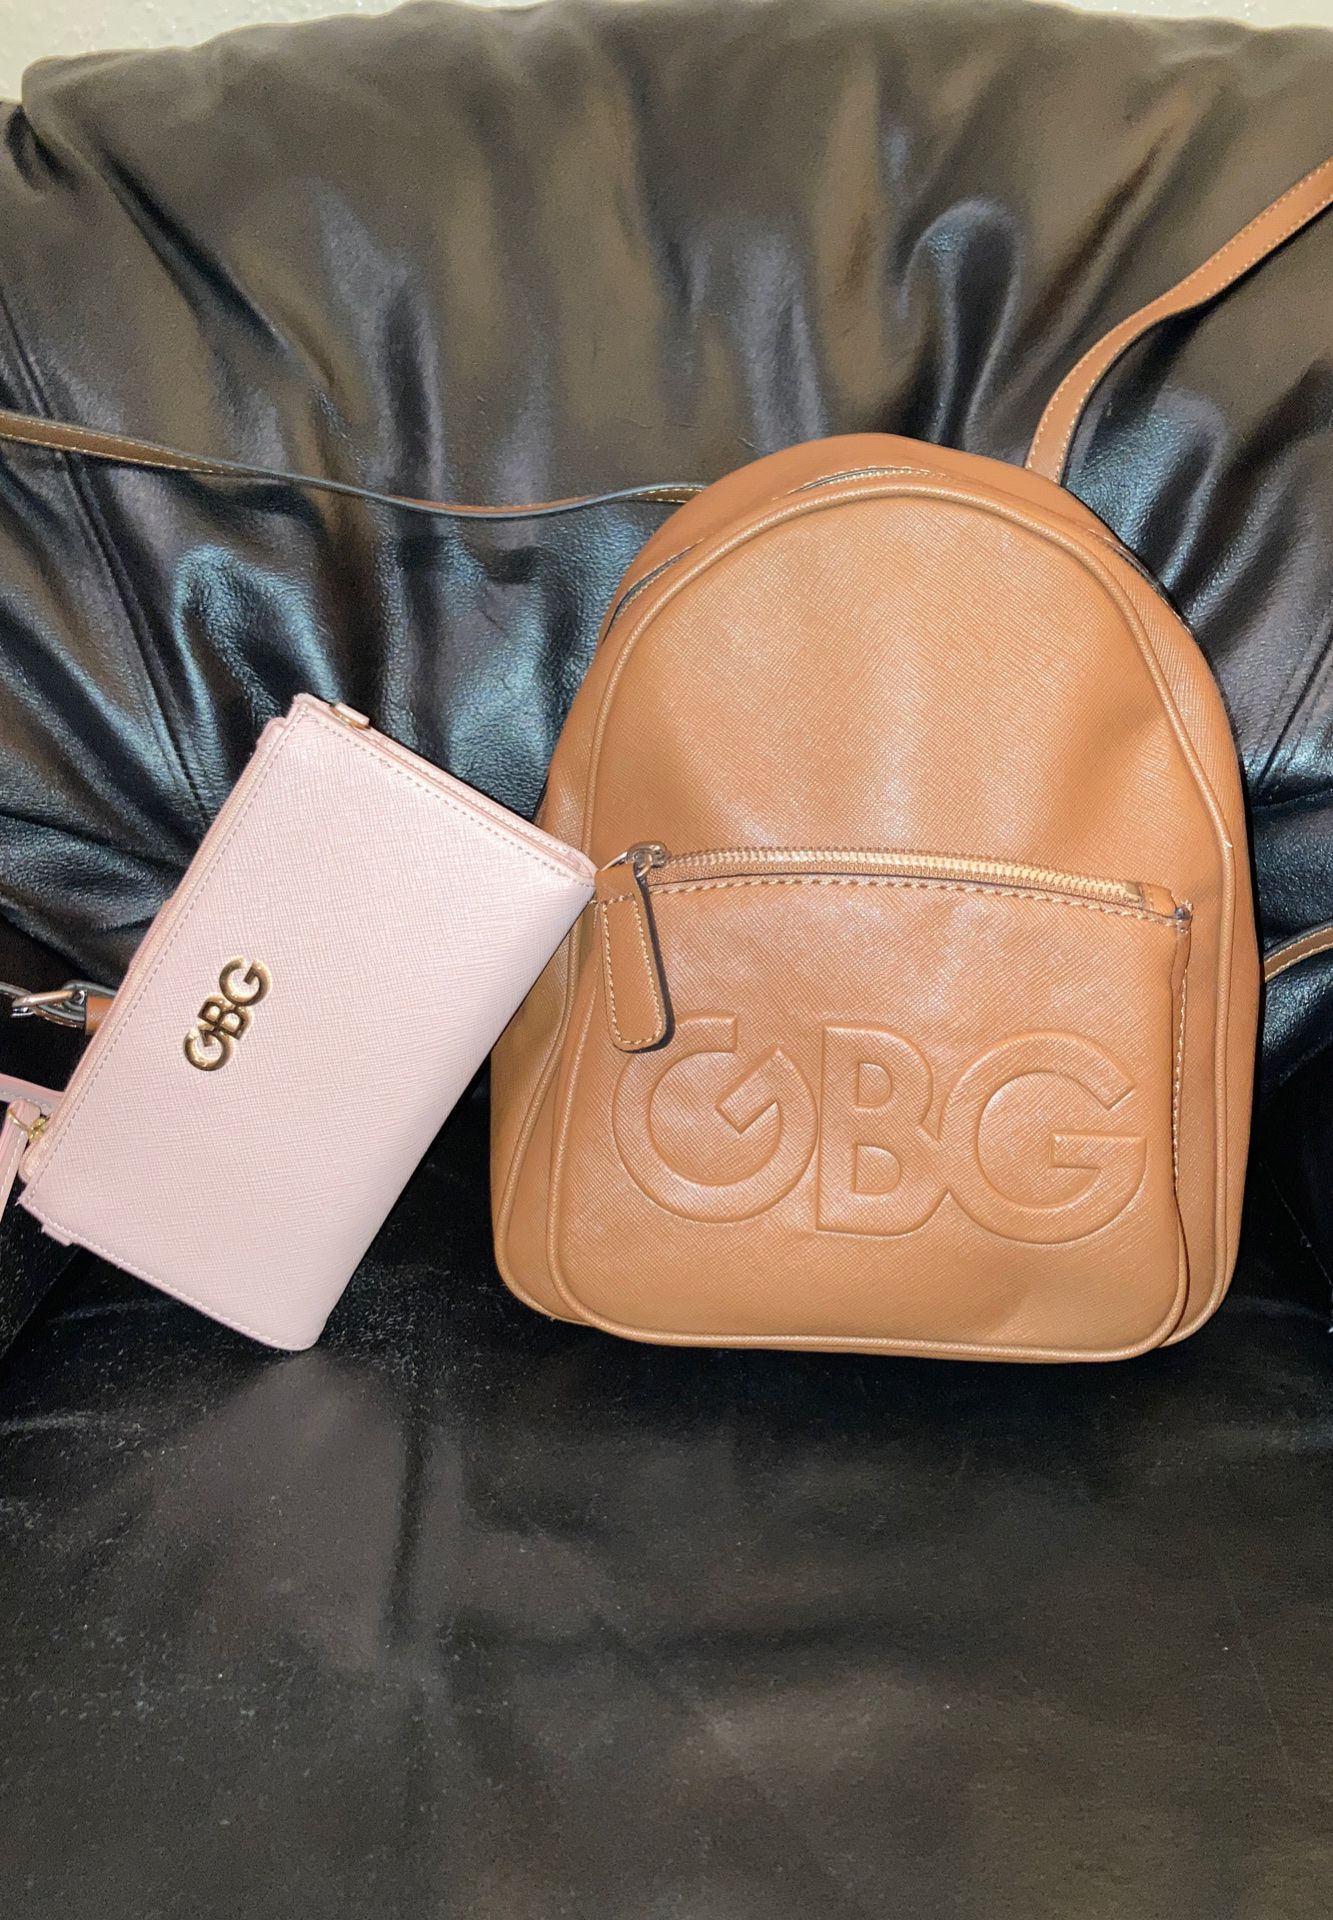 G by Guess Mini Backpack & Wallet included